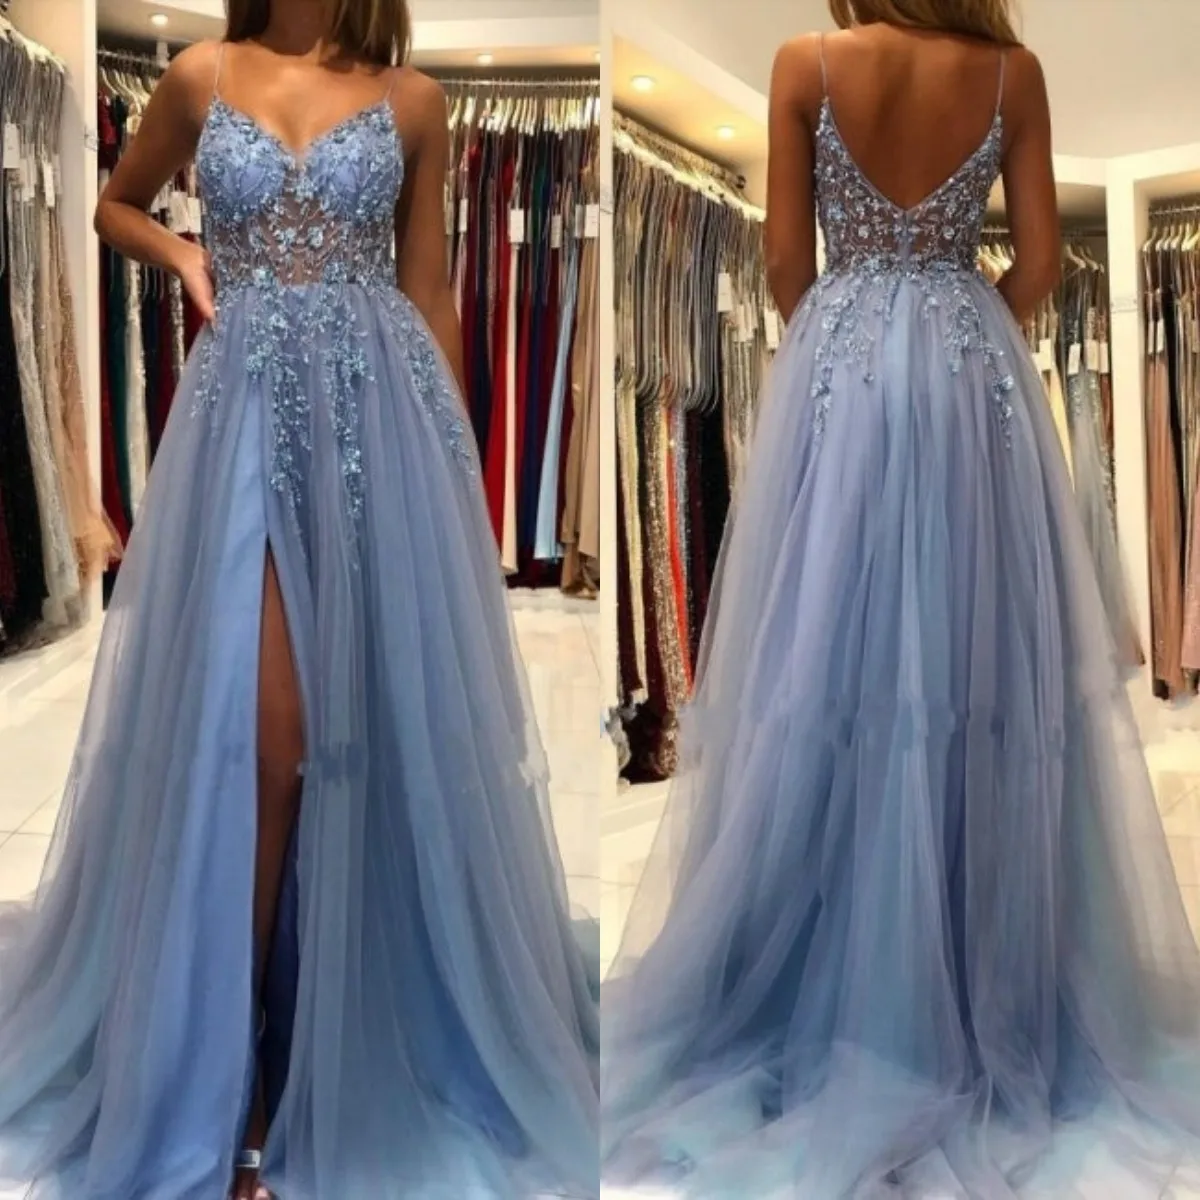 

Elegant Blue Long Evening Dresses Beading Lace Appliqued Prom Dress with Slit Tulle Party Gown Robes De Mariee